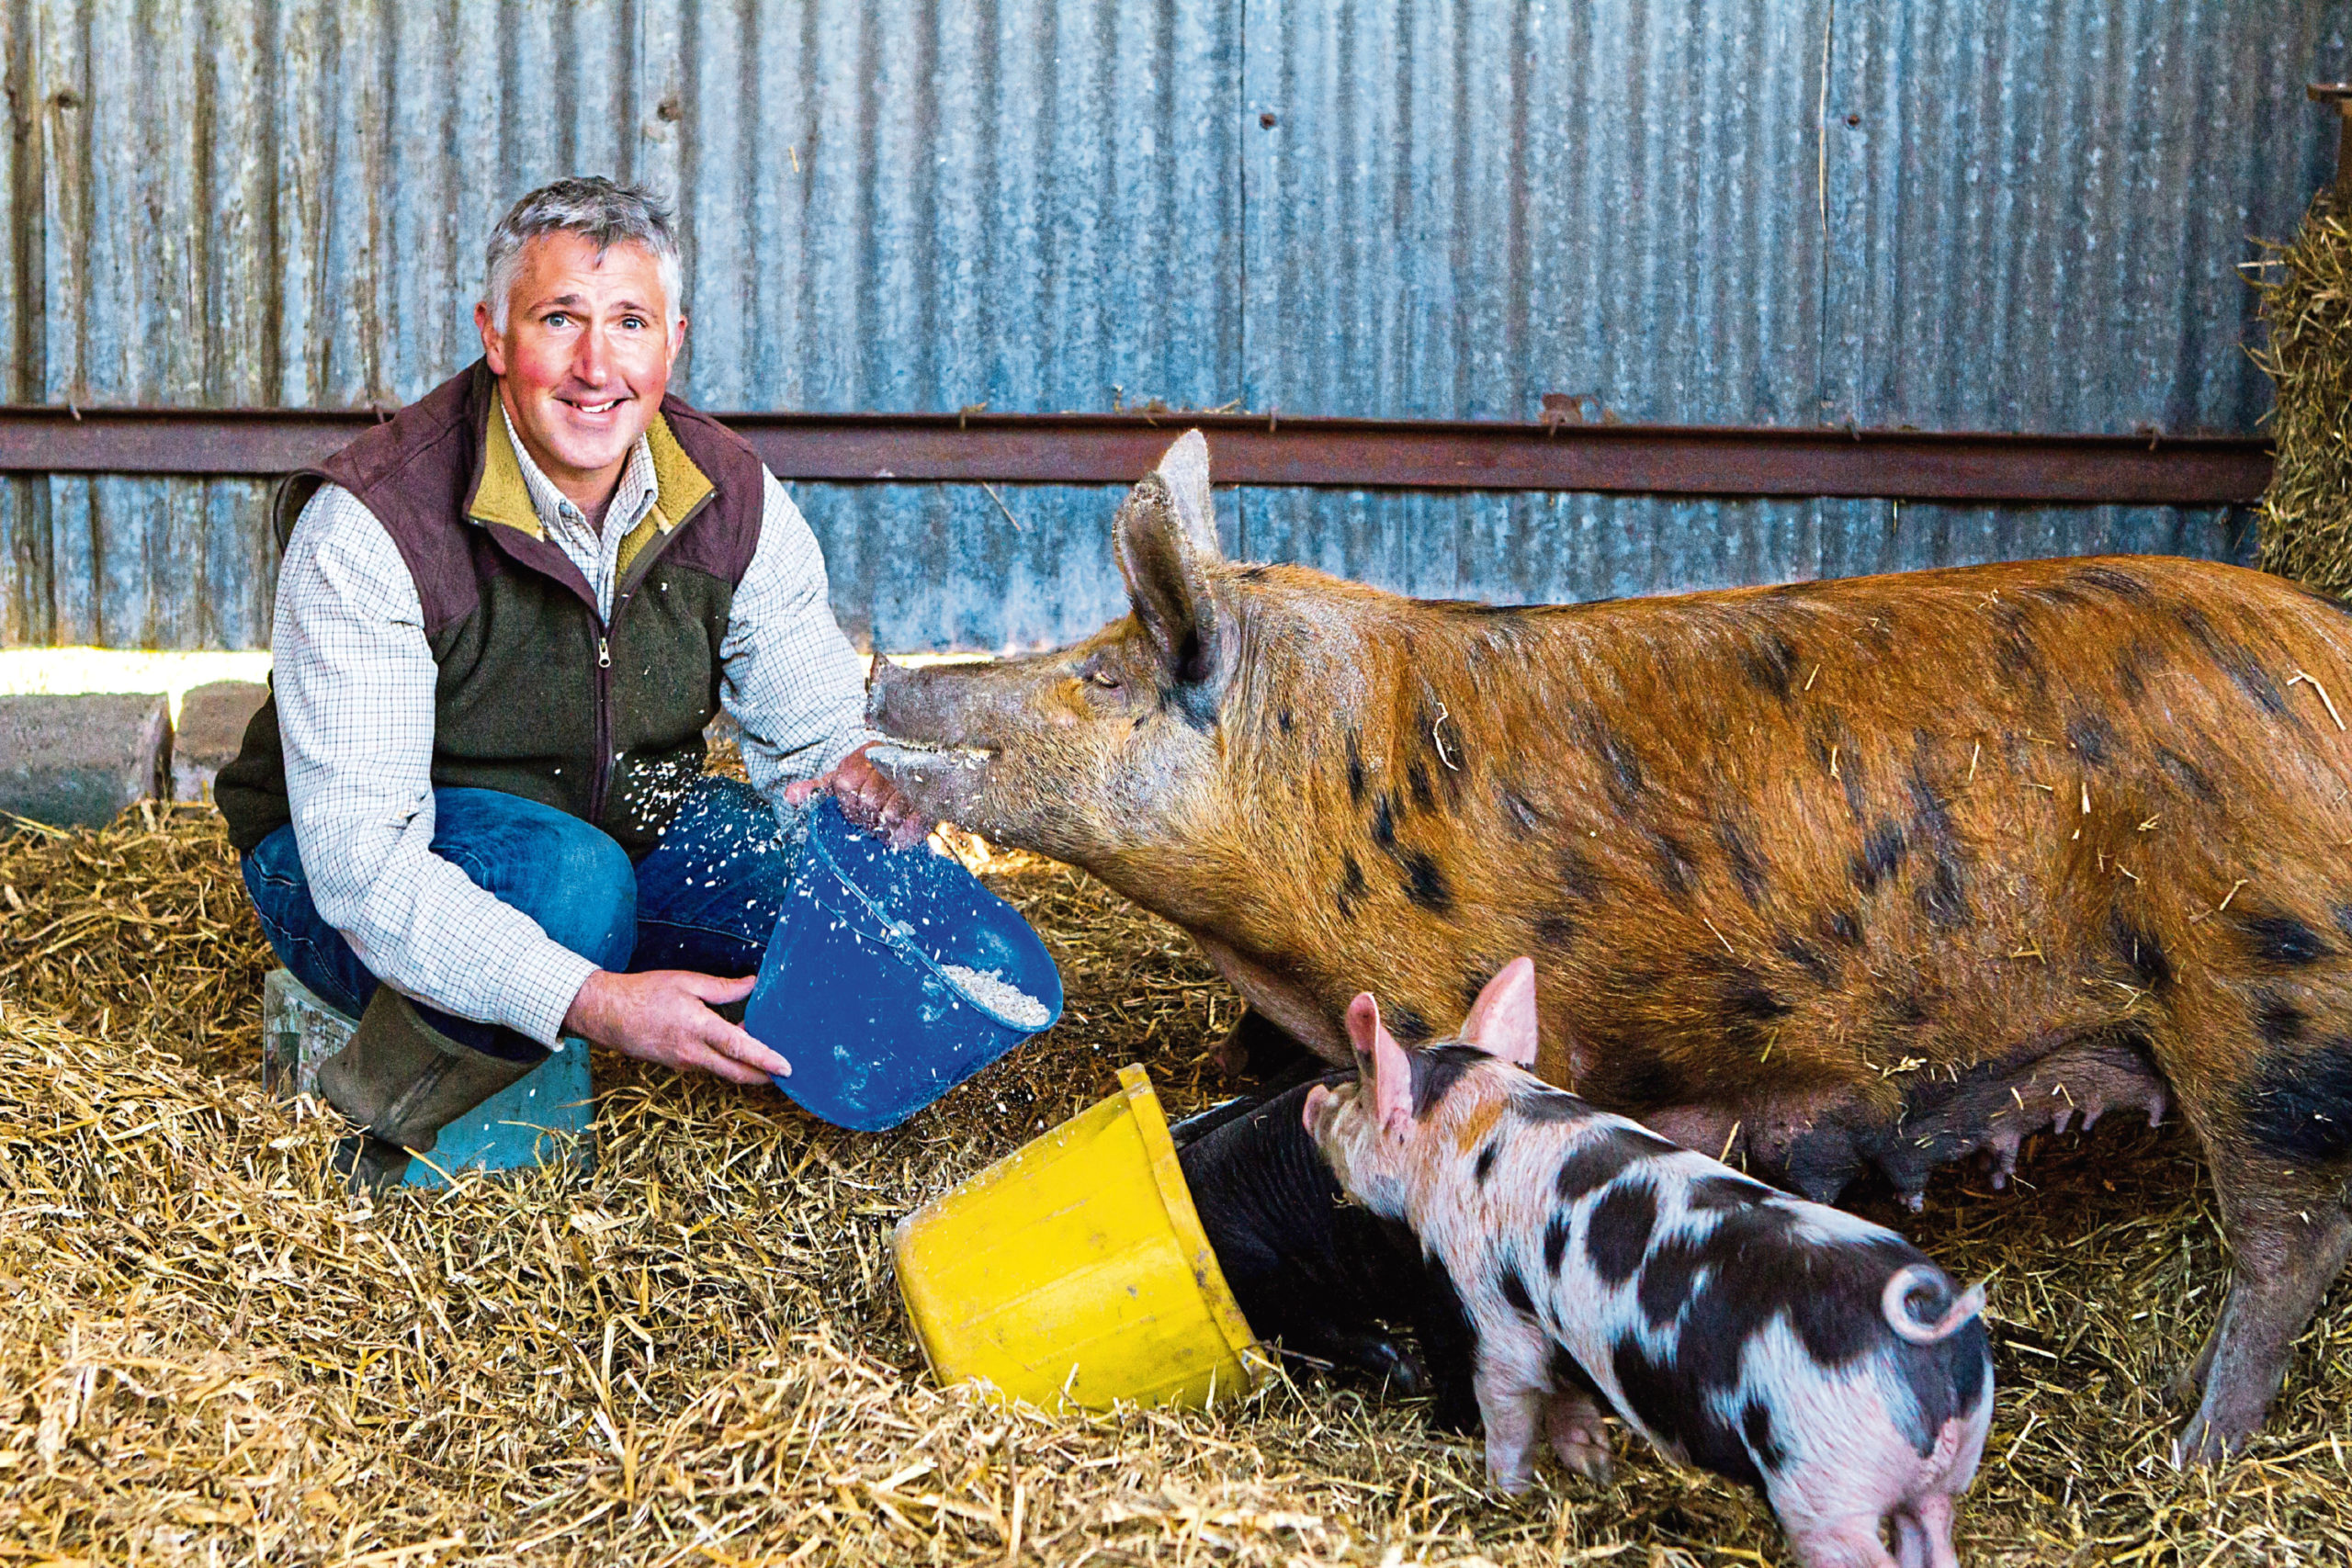 Perthshire organic farmer Hugh Grierson took part in the project.